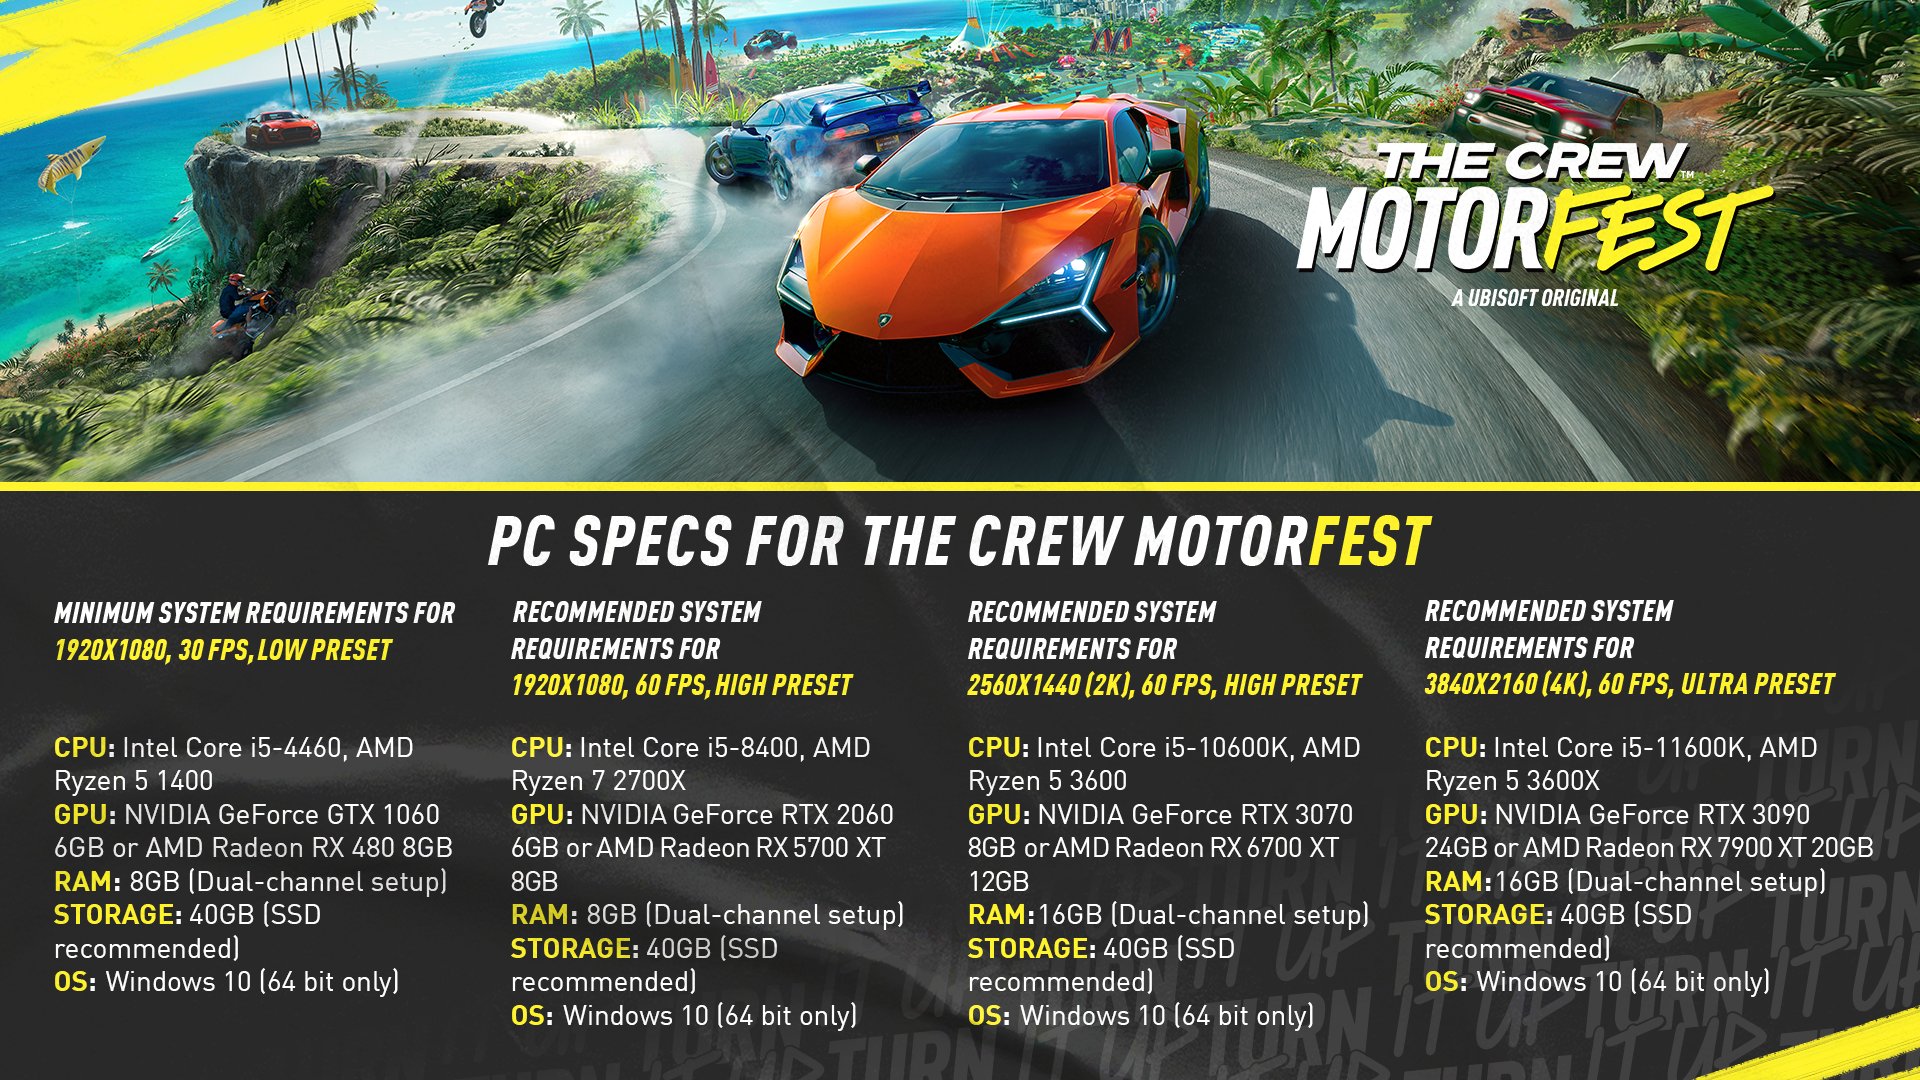 The Crew Motorfest Vehicle List: A Complete Guide - News